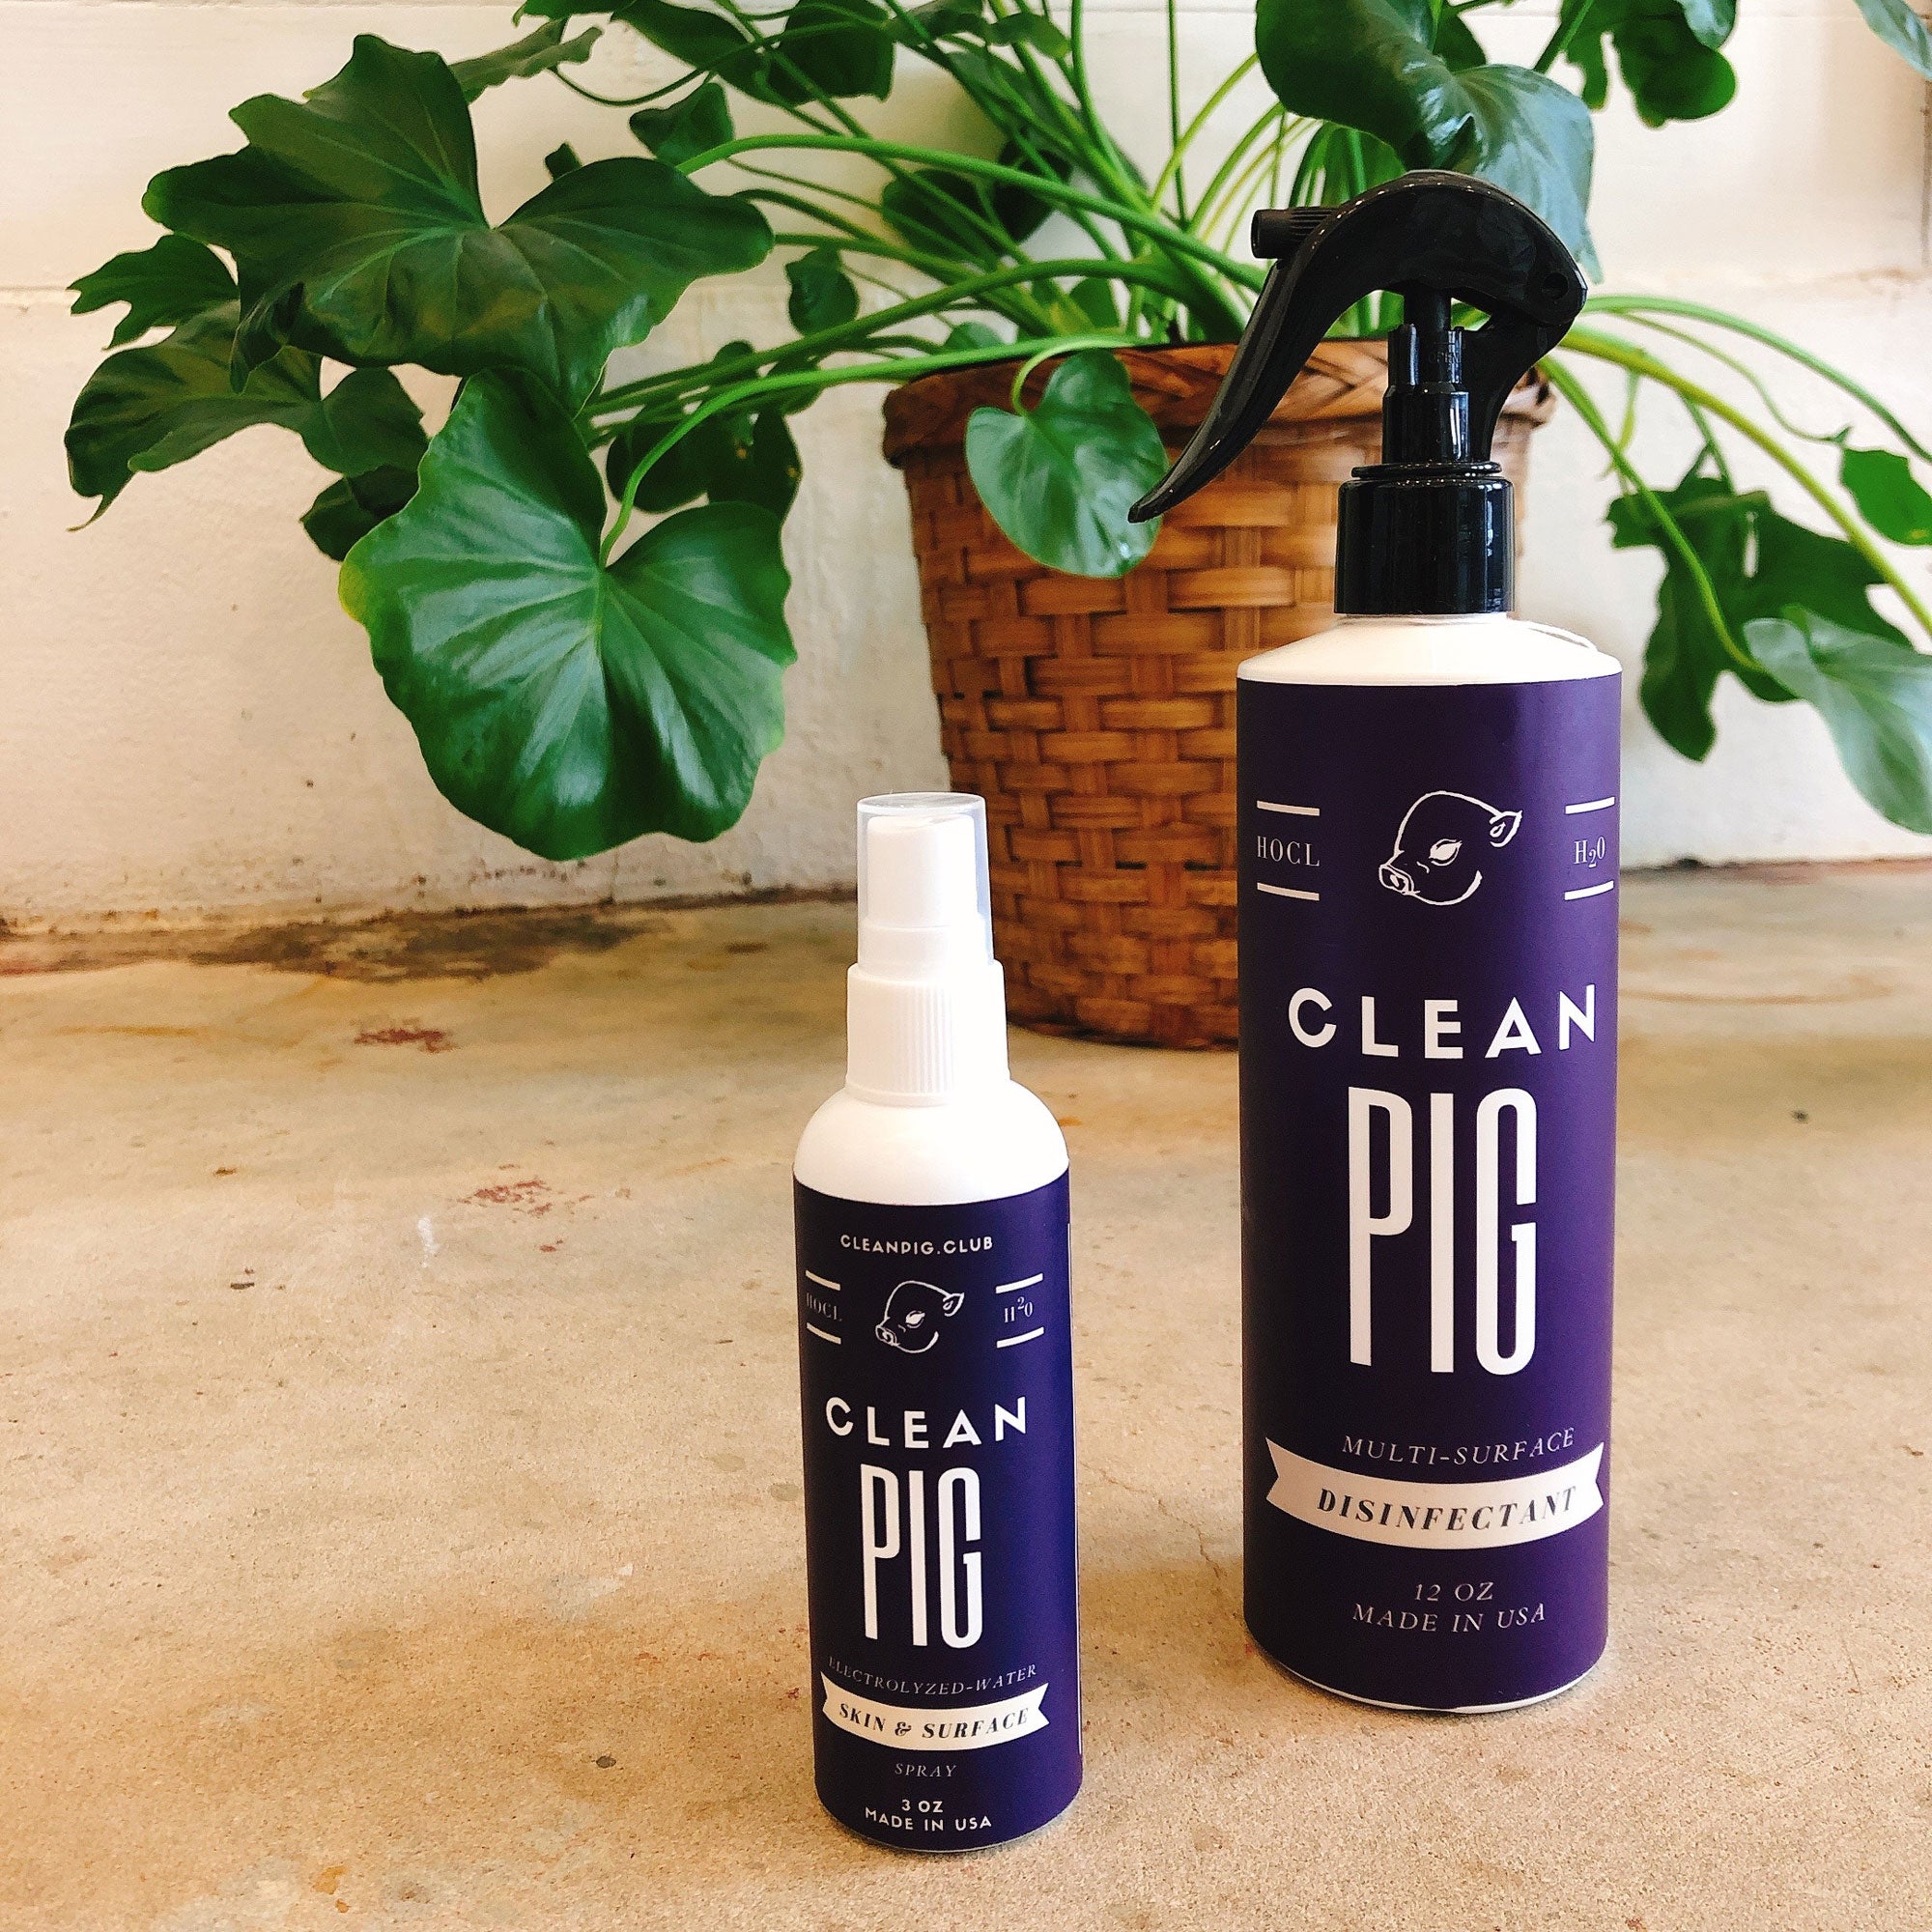 Clean Pig HOCl Disinfectant